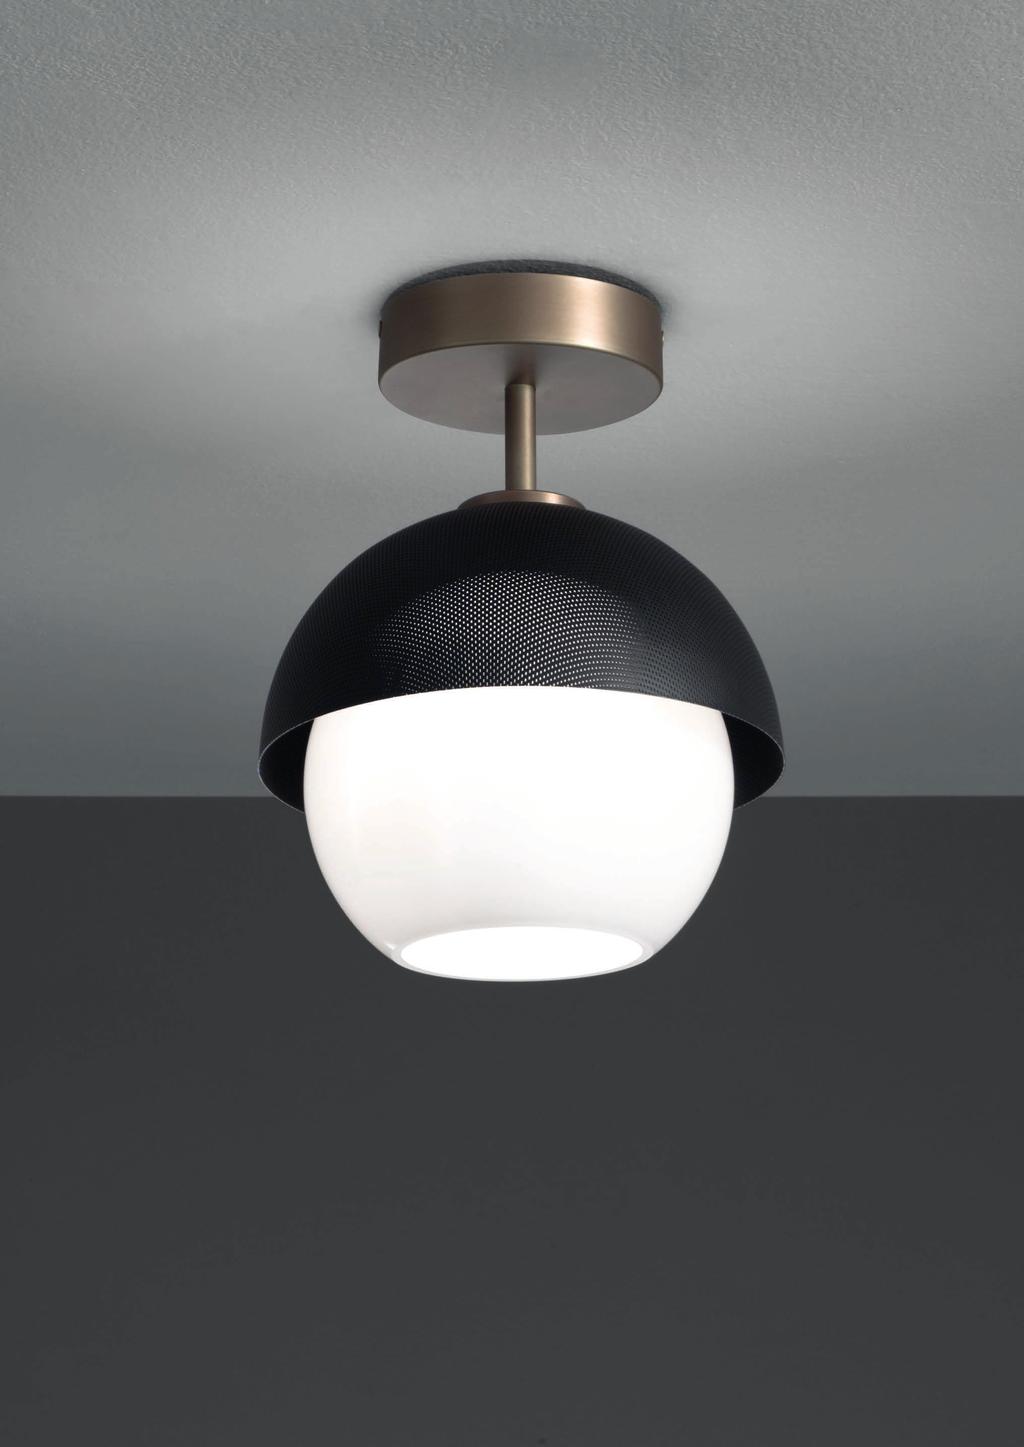 URBAN CEILING 25cm-9 8 Ø 20cm-7 8 Ceiling lamp with diffuse light and white, tobacco or smoke Murano blown glass diffuser.